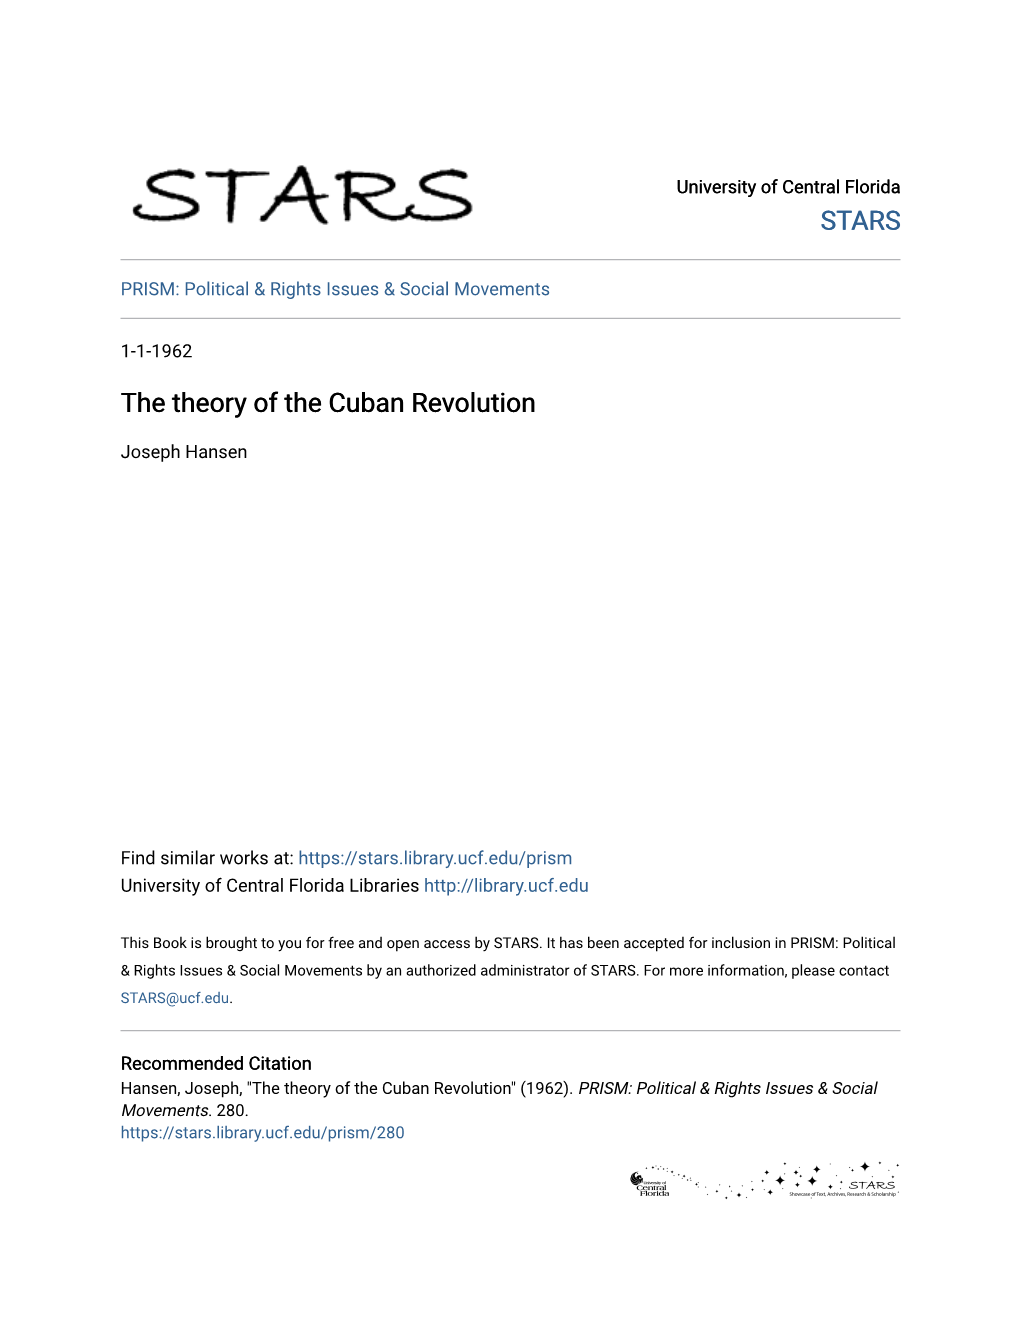 The Theory of the Cuban Revolution